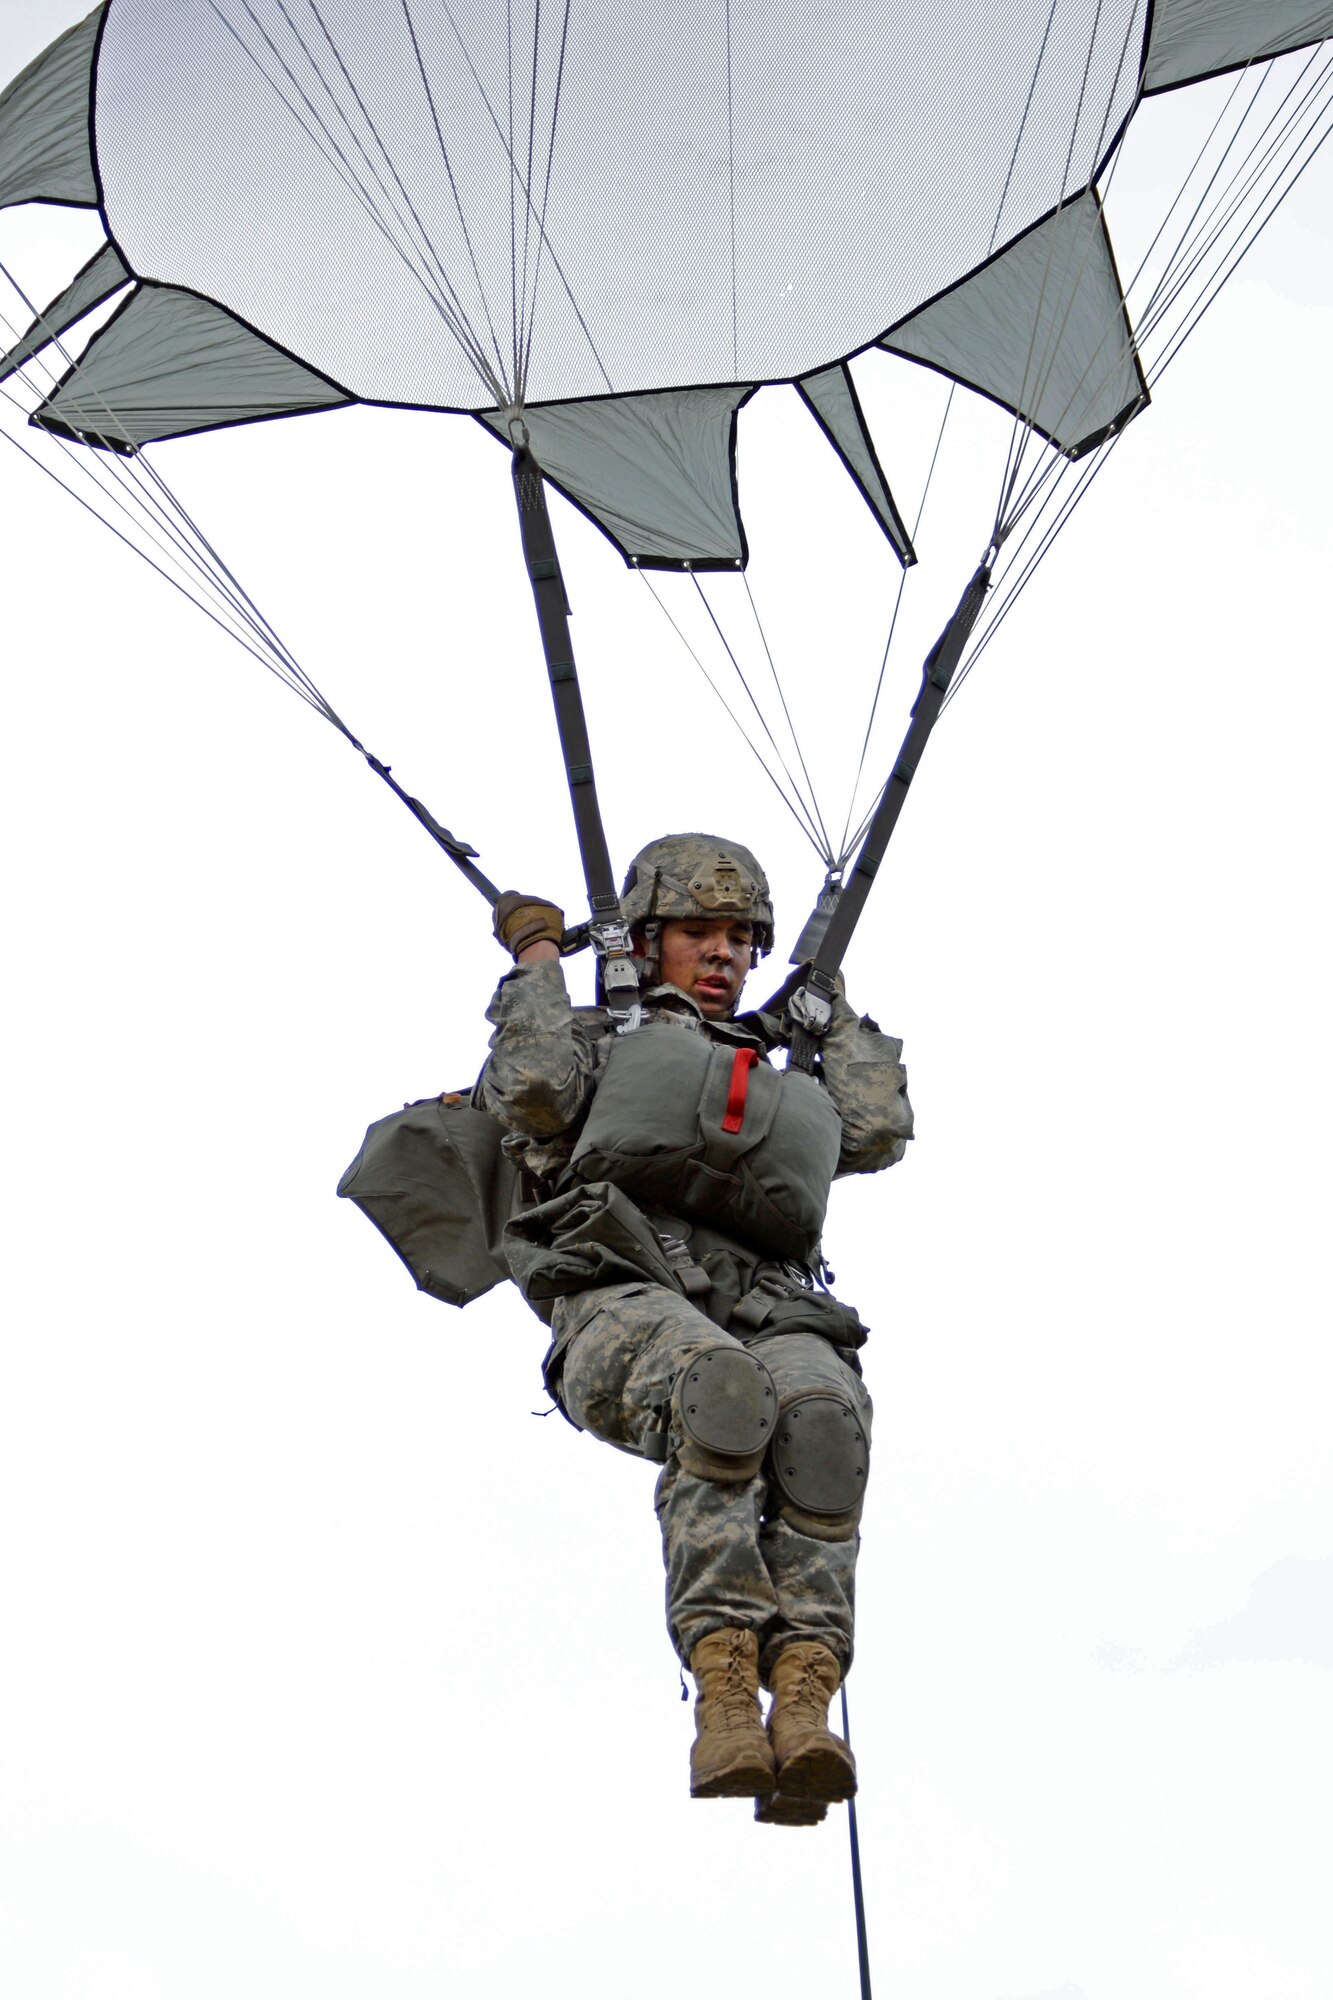 A paratrooper assigned to 1st Battalion, 501st Parachute Infantry Regiment, 4th Infantry Brigade Combat Team (Airborne), 25th Infantry Division, U.S. Army Alaska, prepares to land during a joint forcible entry exercise at Malemute Drop Zone on Joint Base Elmendorf-Richardson, Alaska, Aug. 23, 2016, as part of Exercise Spartan Agoge. Spartan Agoge is a brigade-level field training exercise that began Aug. 15, and focuses on an array of combat-related tasks from squad live-fire exercises to helicopter air insertion and airborne assault training. (U.S. Air Force photo by Airman 1st Class Valerie Monroy)